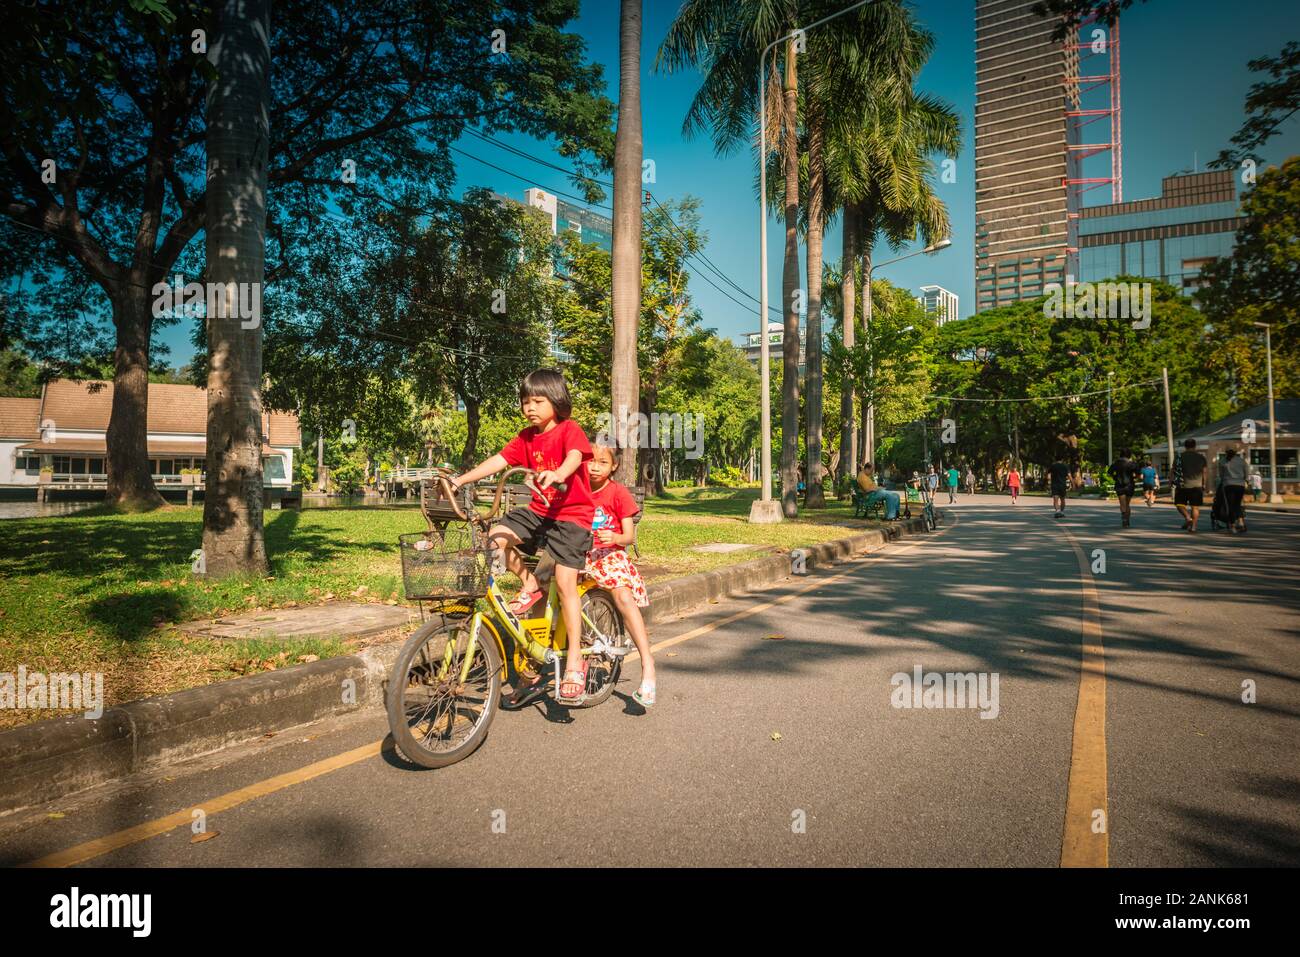 Bangkok/Thailand-06December2019: Lumphini park, morning view with two young girls riding a yellow bicycle on the road and tower building in background Stock Photo